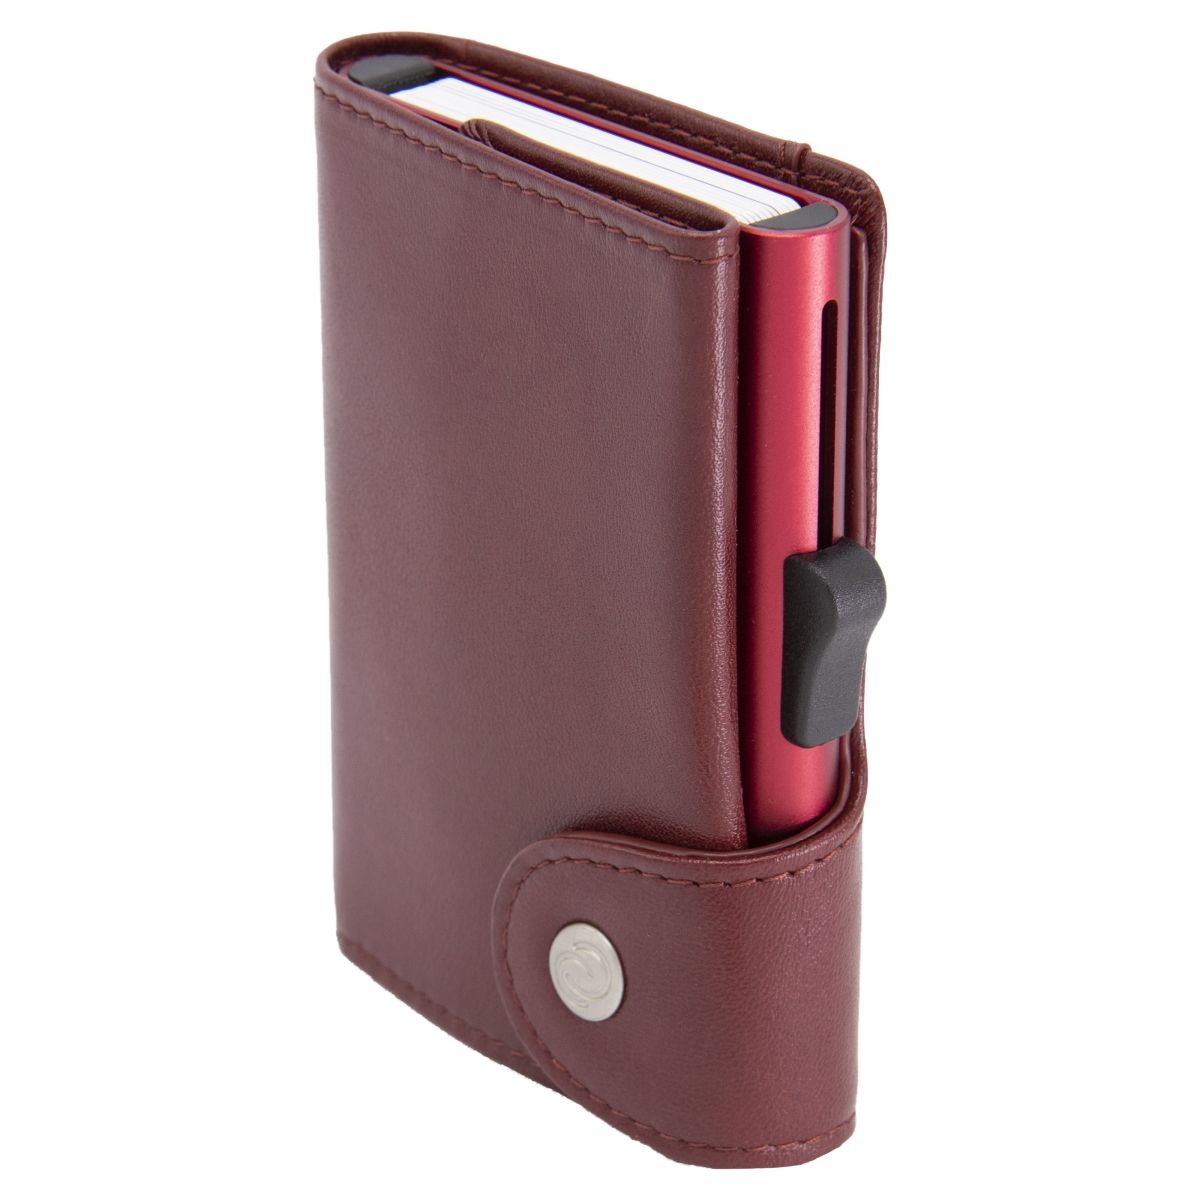 C-Secure XL Aluminum Wallet with Genuine Leather - Red